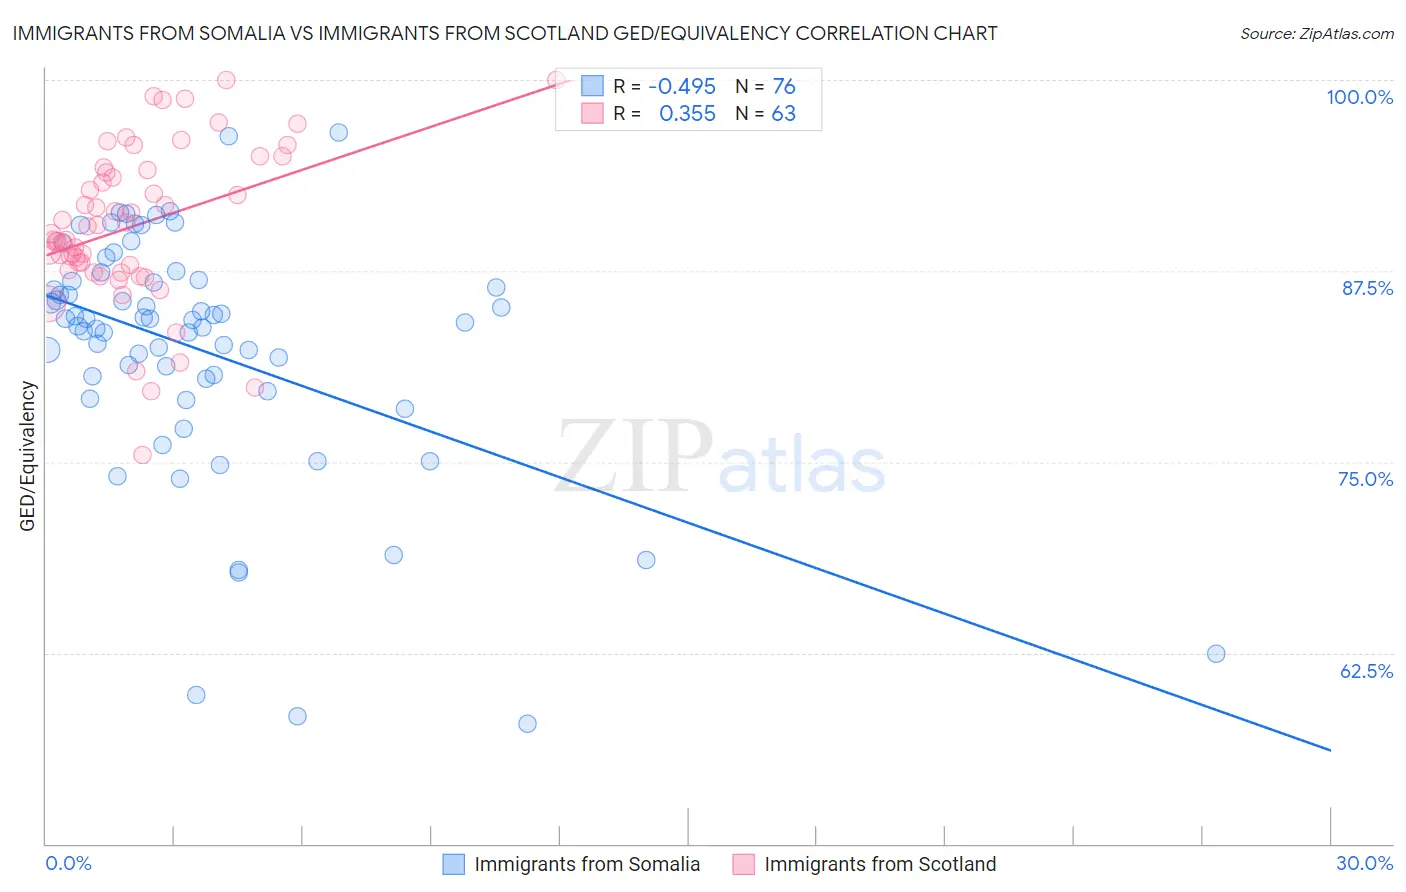 Immigrants from Somalia vs Immigrants from Scotland GED/Equivalency